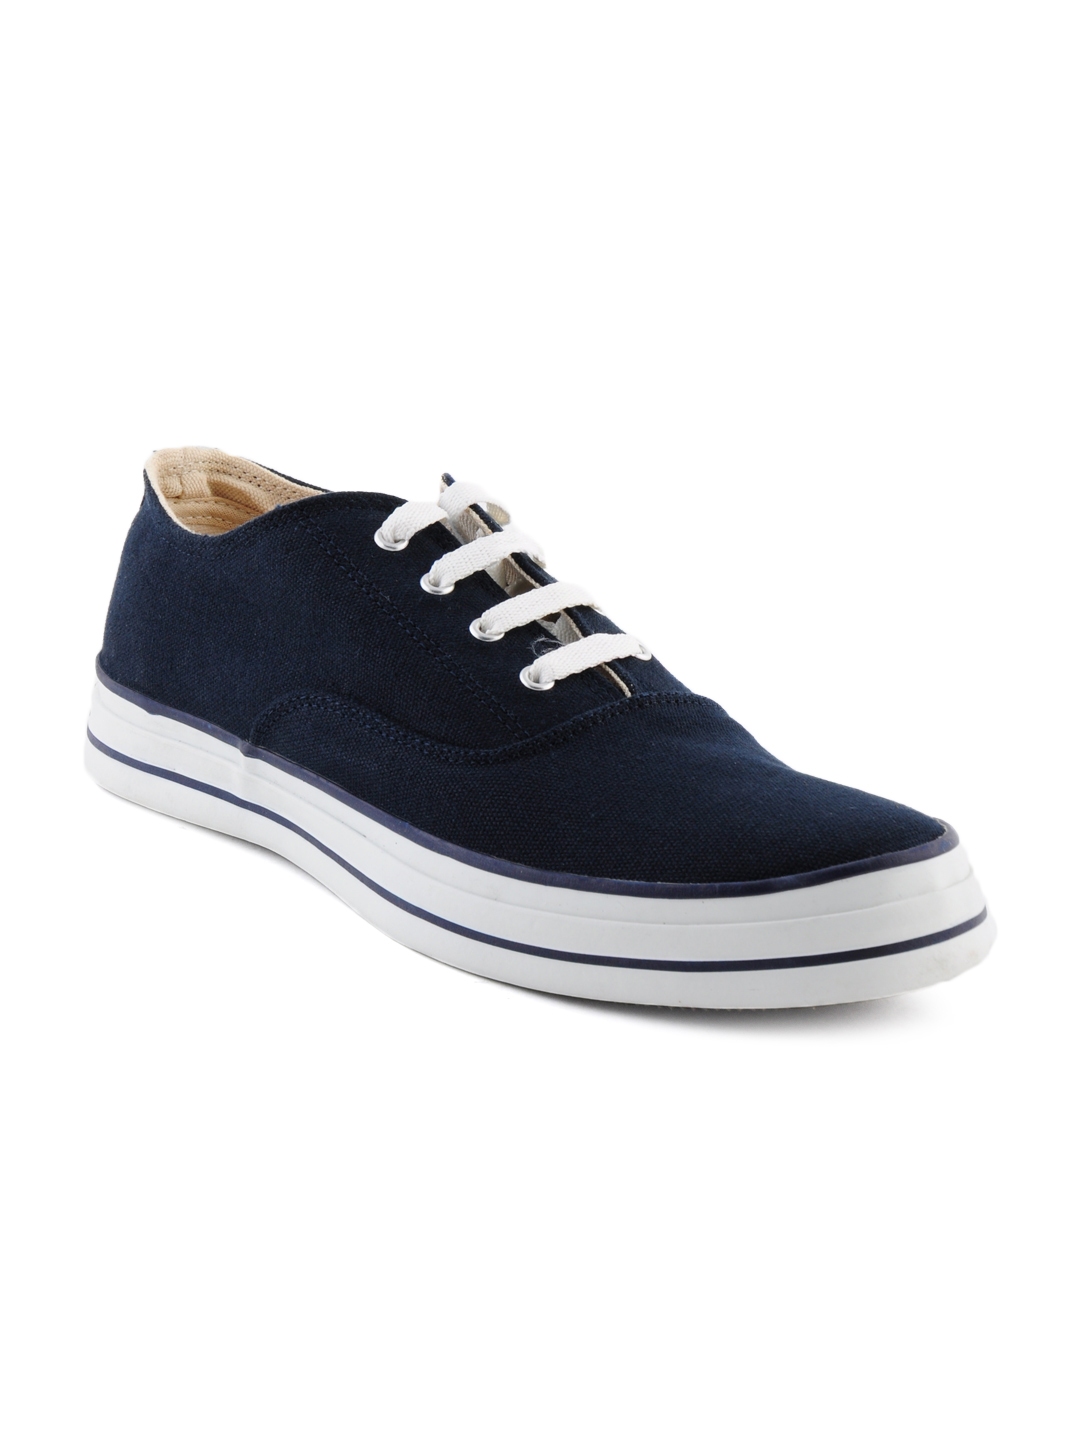 Buy Converse Men Oxford Navy Blue Casual Shoes - Casual Shoes for Men ...